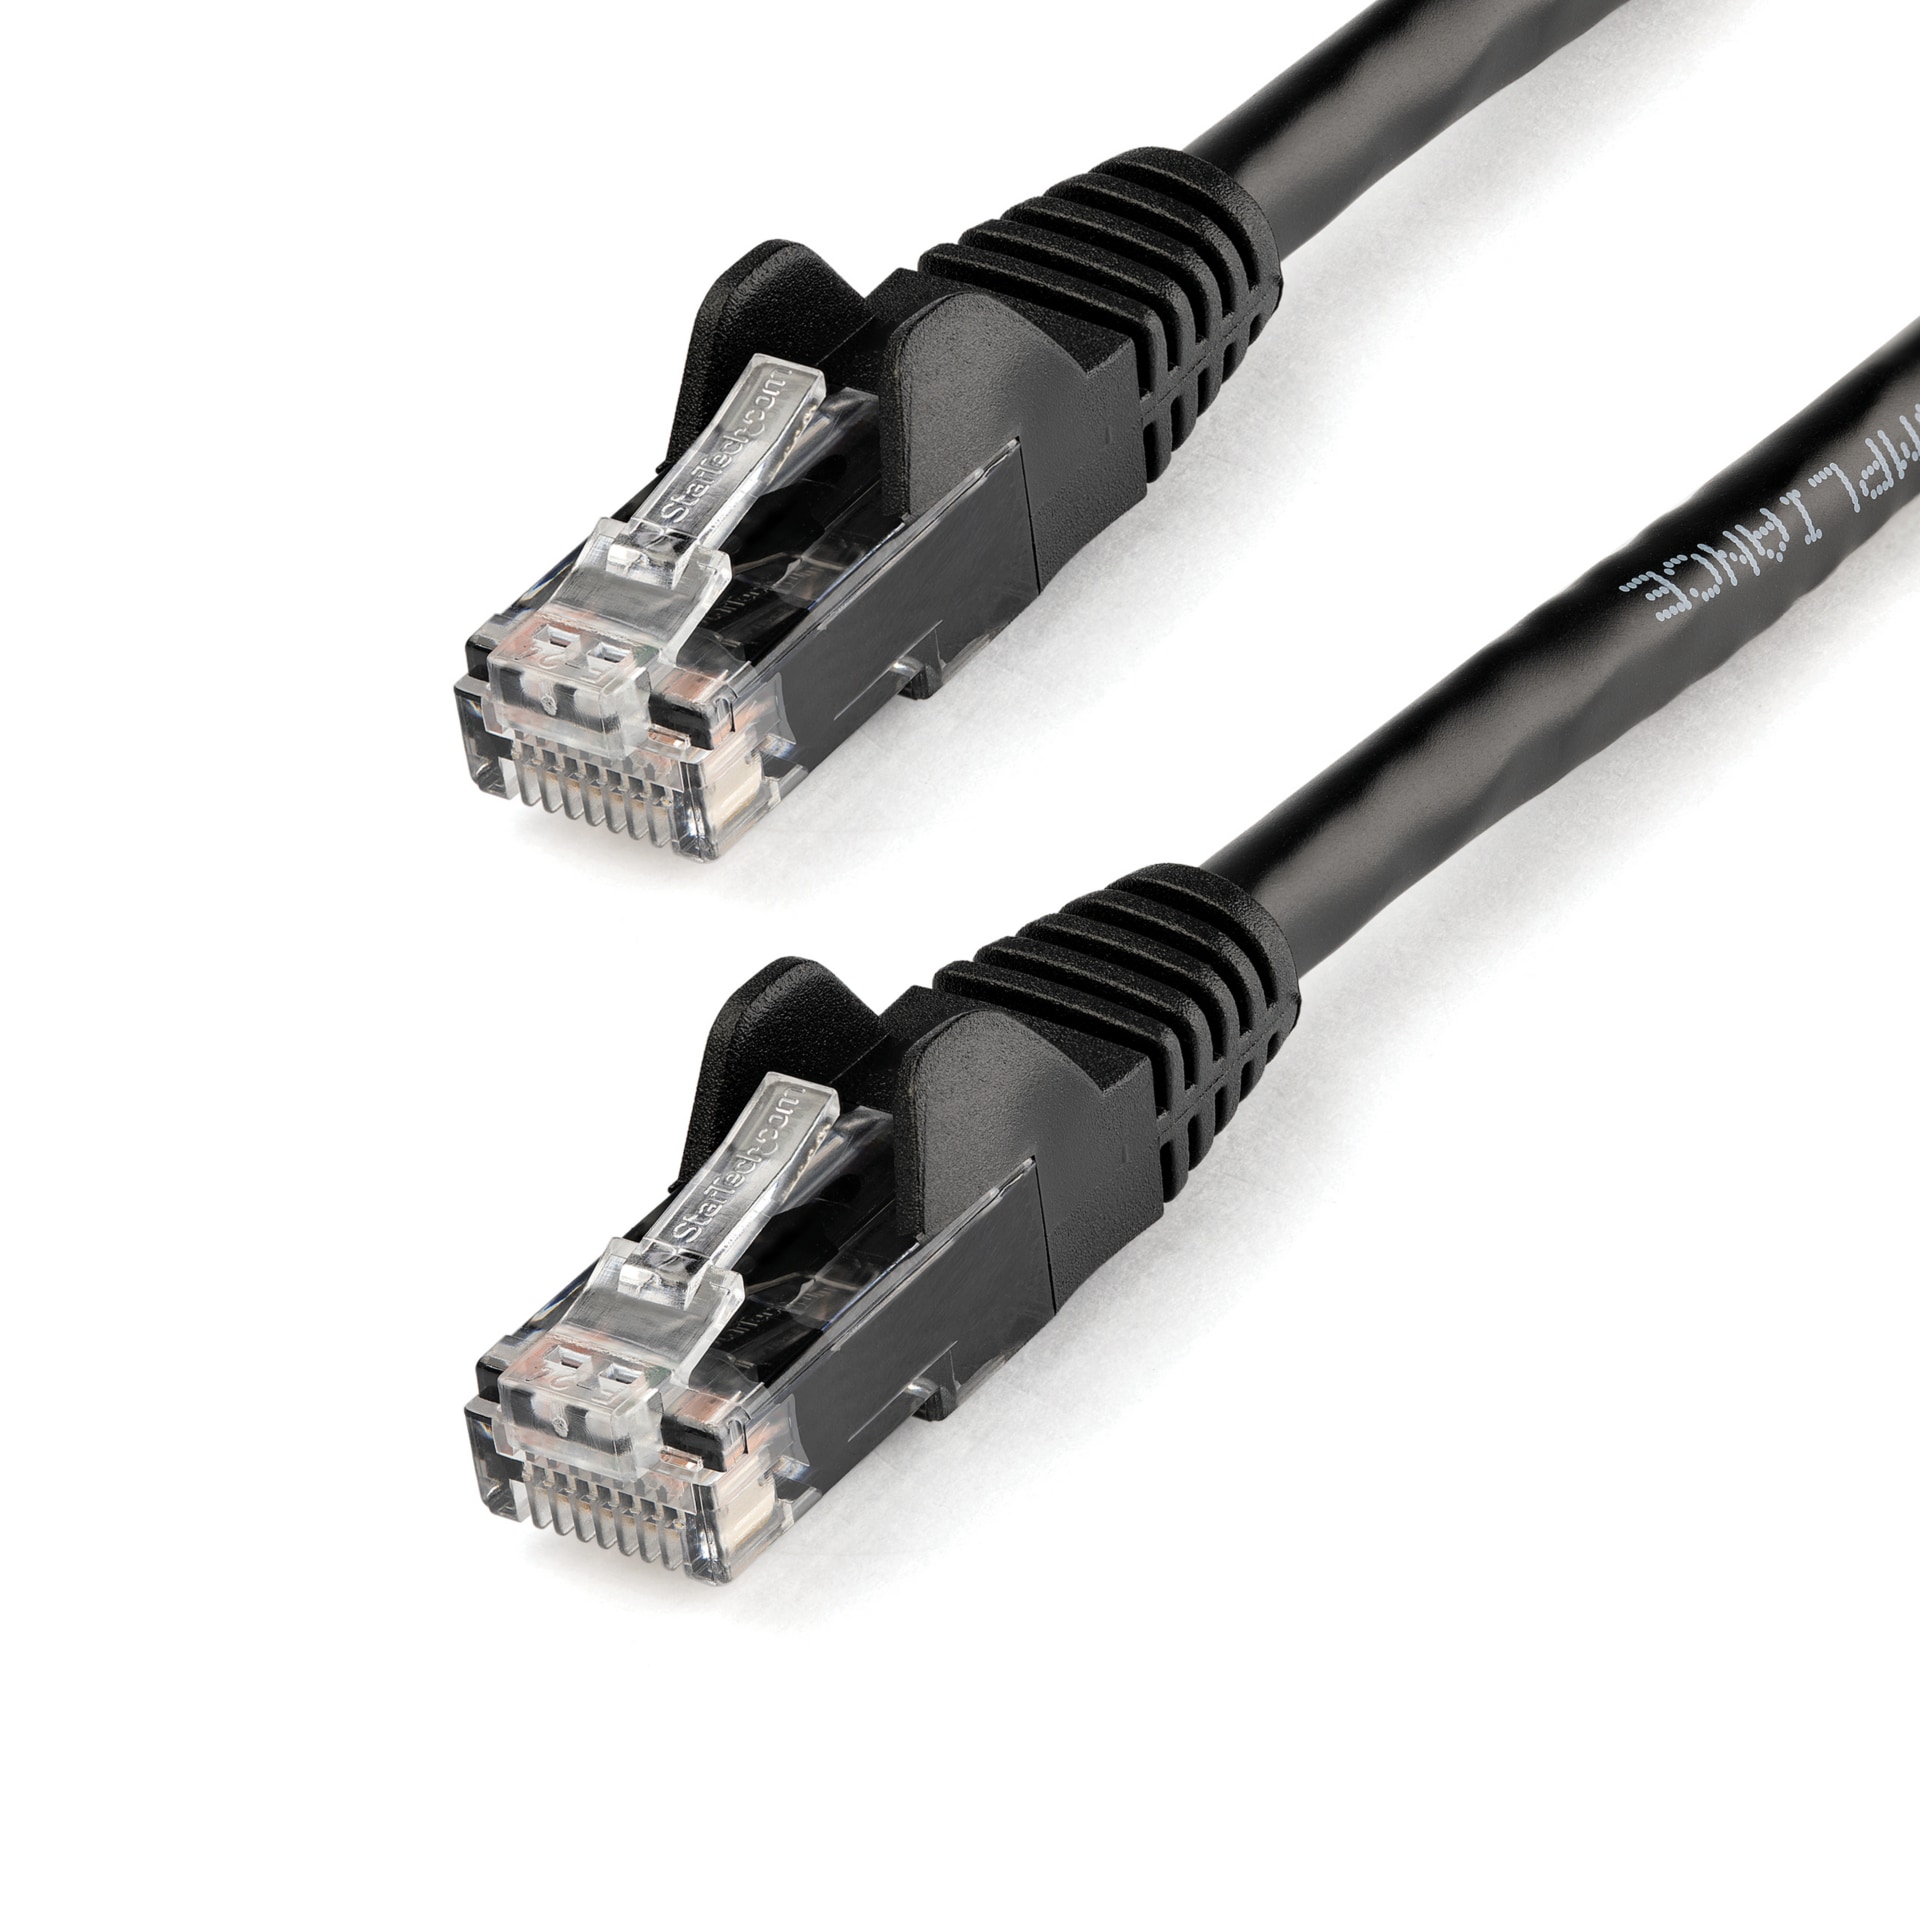 StarTech.com CAT6 Ethernet Cable 50' Black 650MHz PoE Snagless Patch Cord